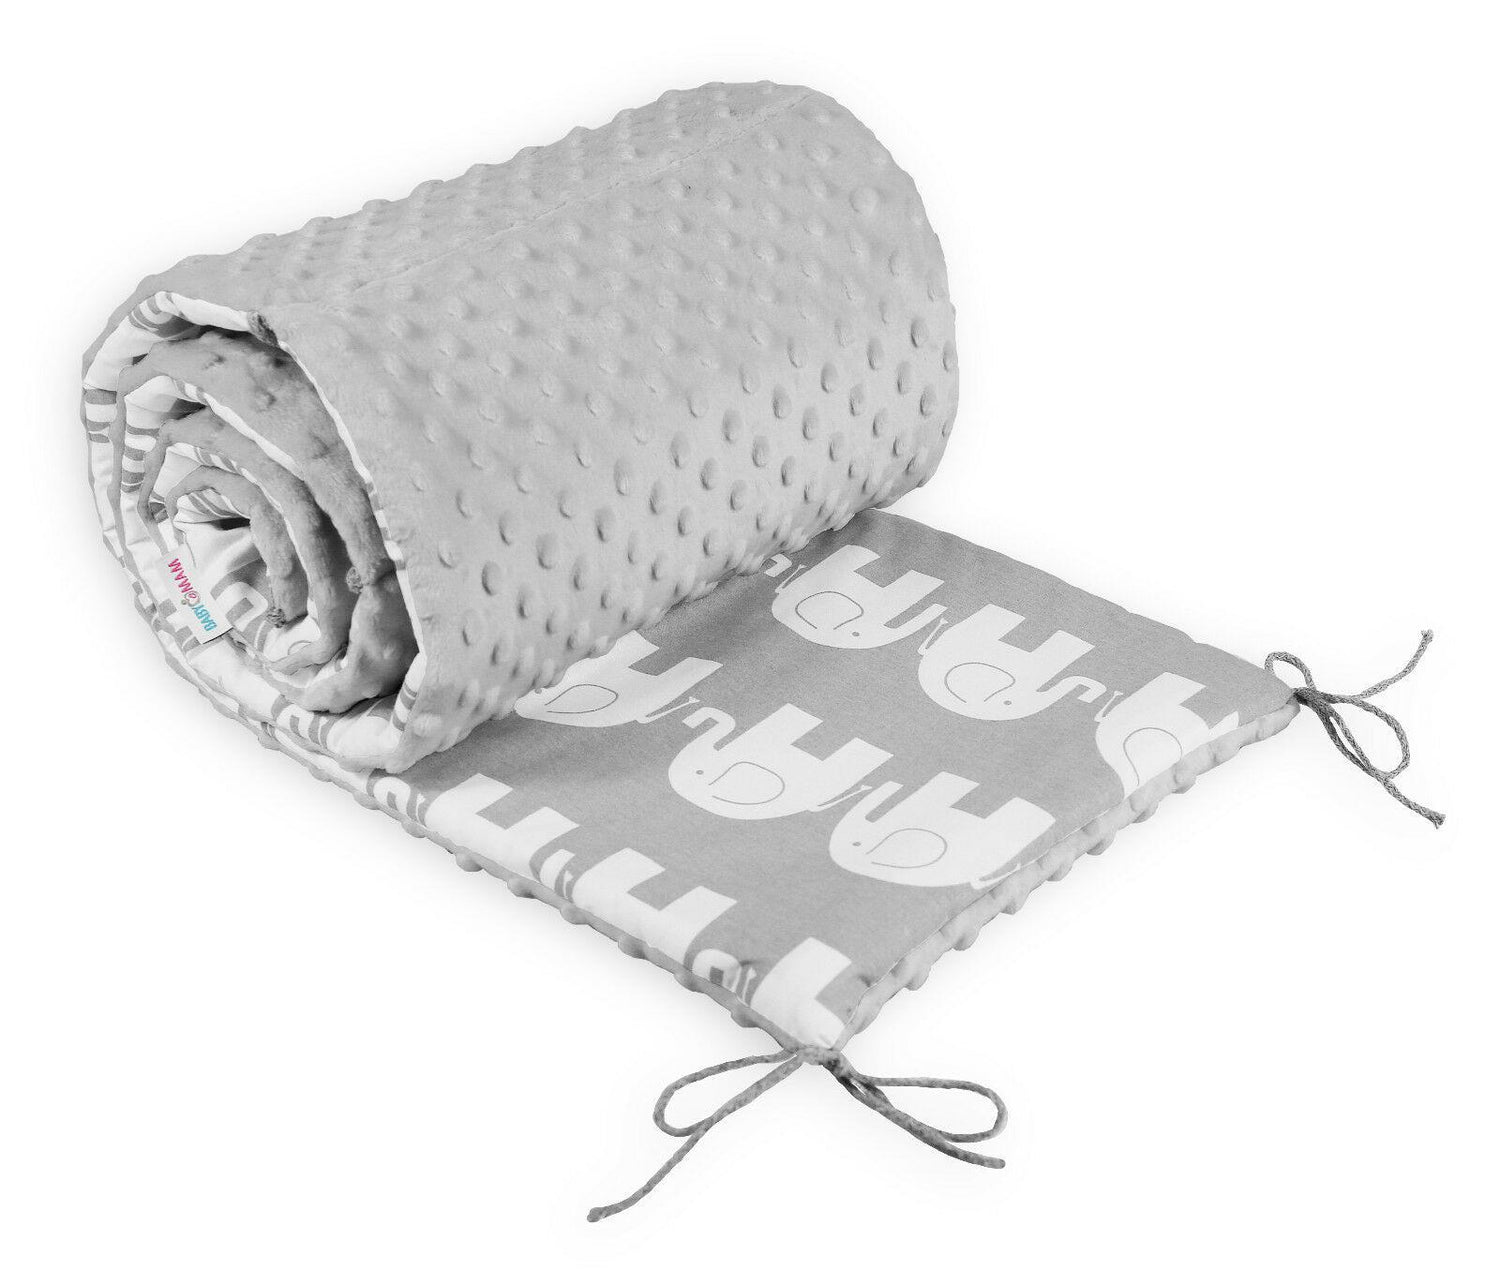 Baby dimple padded bumper nursery protection fit cot bed 140x70 190cm Grey / Grey elephants